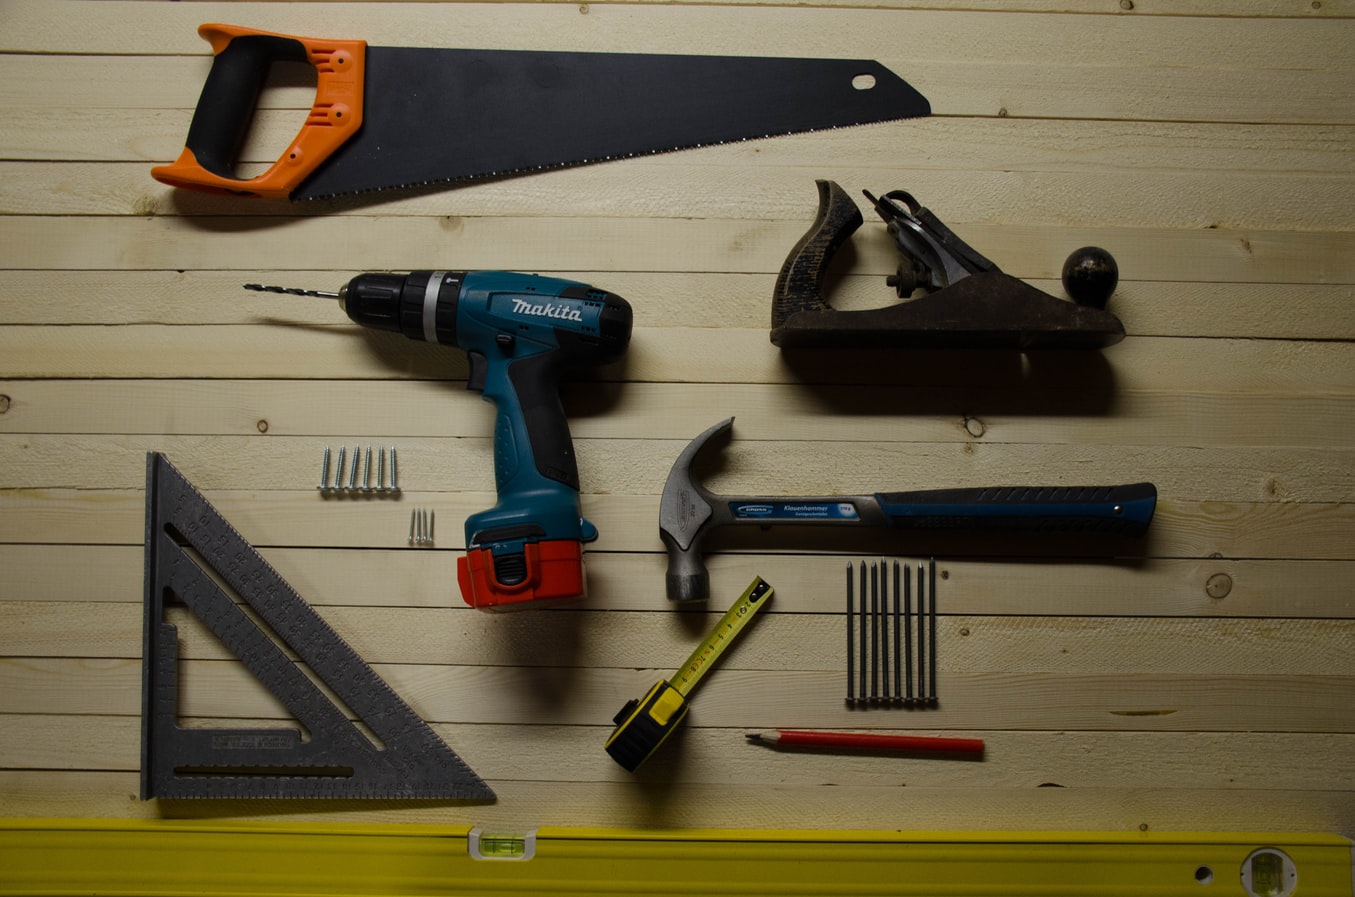 Hand tools organized neatly on the wall